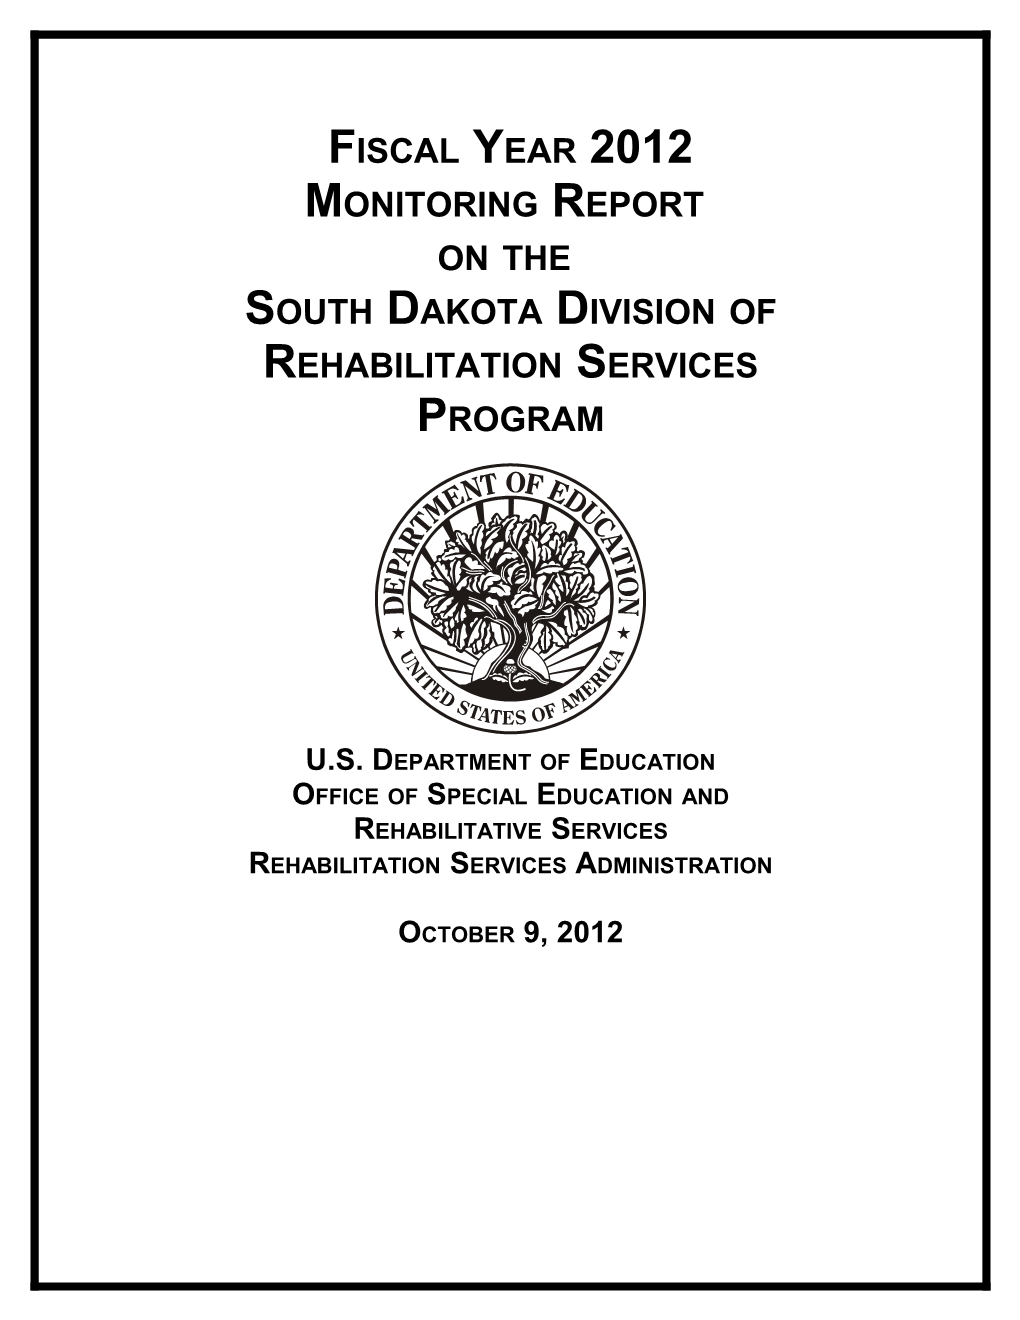 Fiscal Year 2012 Monitoring Report on the South Dakota Division of Rehabilitation Services